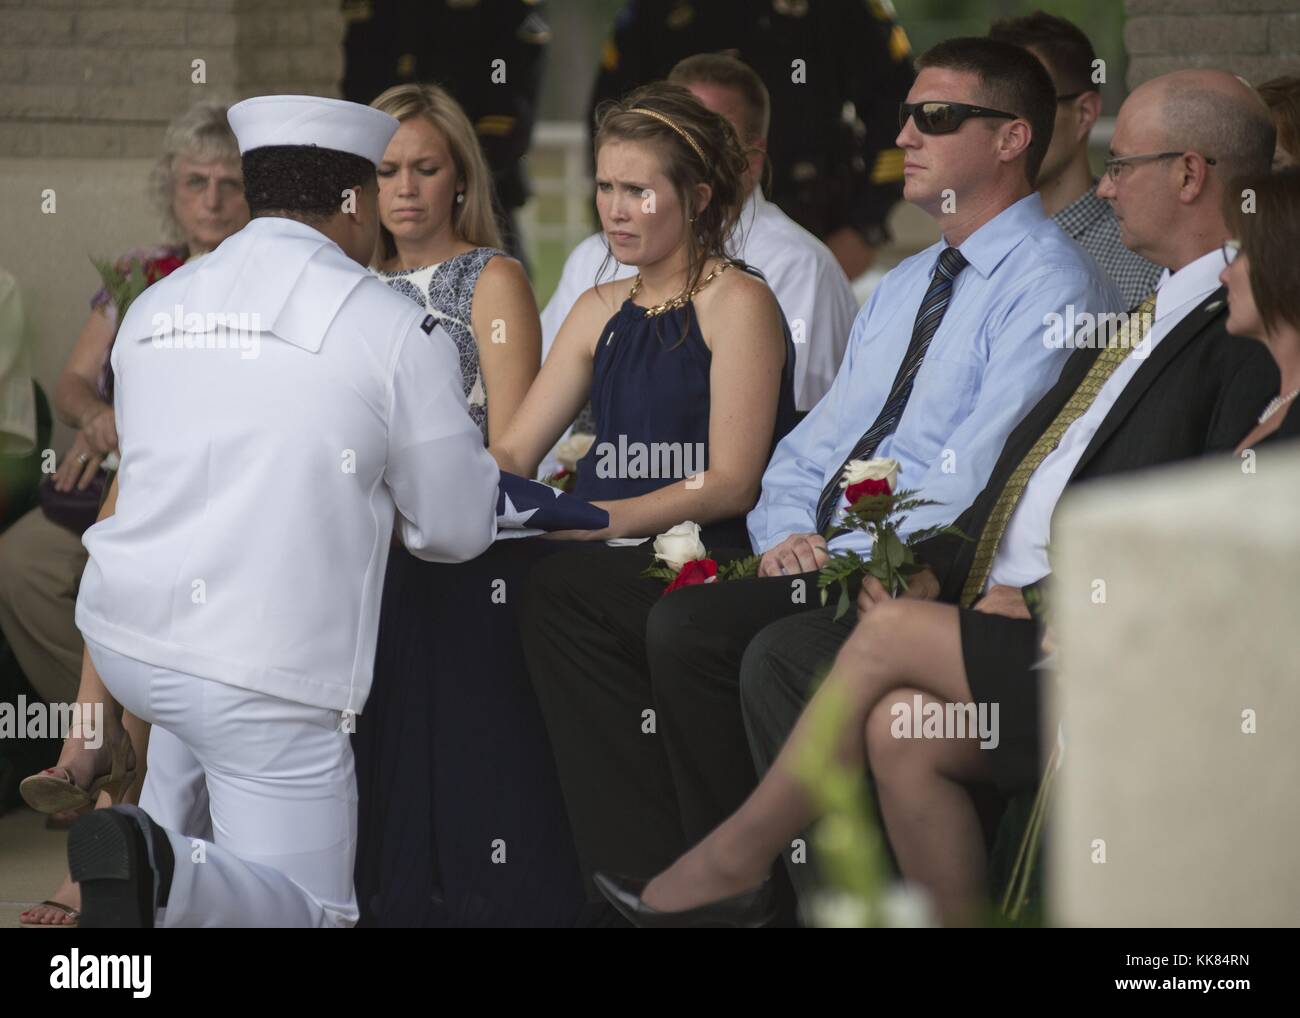 Operations Specialist 2nd Class Jose Rodriguez presents a folded American flag to Angie Smith, widow of Logistics Specialist 2nd Class Randall Smith, during Petty Officer Smith's interment ceremony at Chattanooga National Cemetery, Chattanooga, Tennessee. Image courtesy Mass Communication Specialist 2nd Class Justin Wolpert/US Navy, 2015. Stock Photo